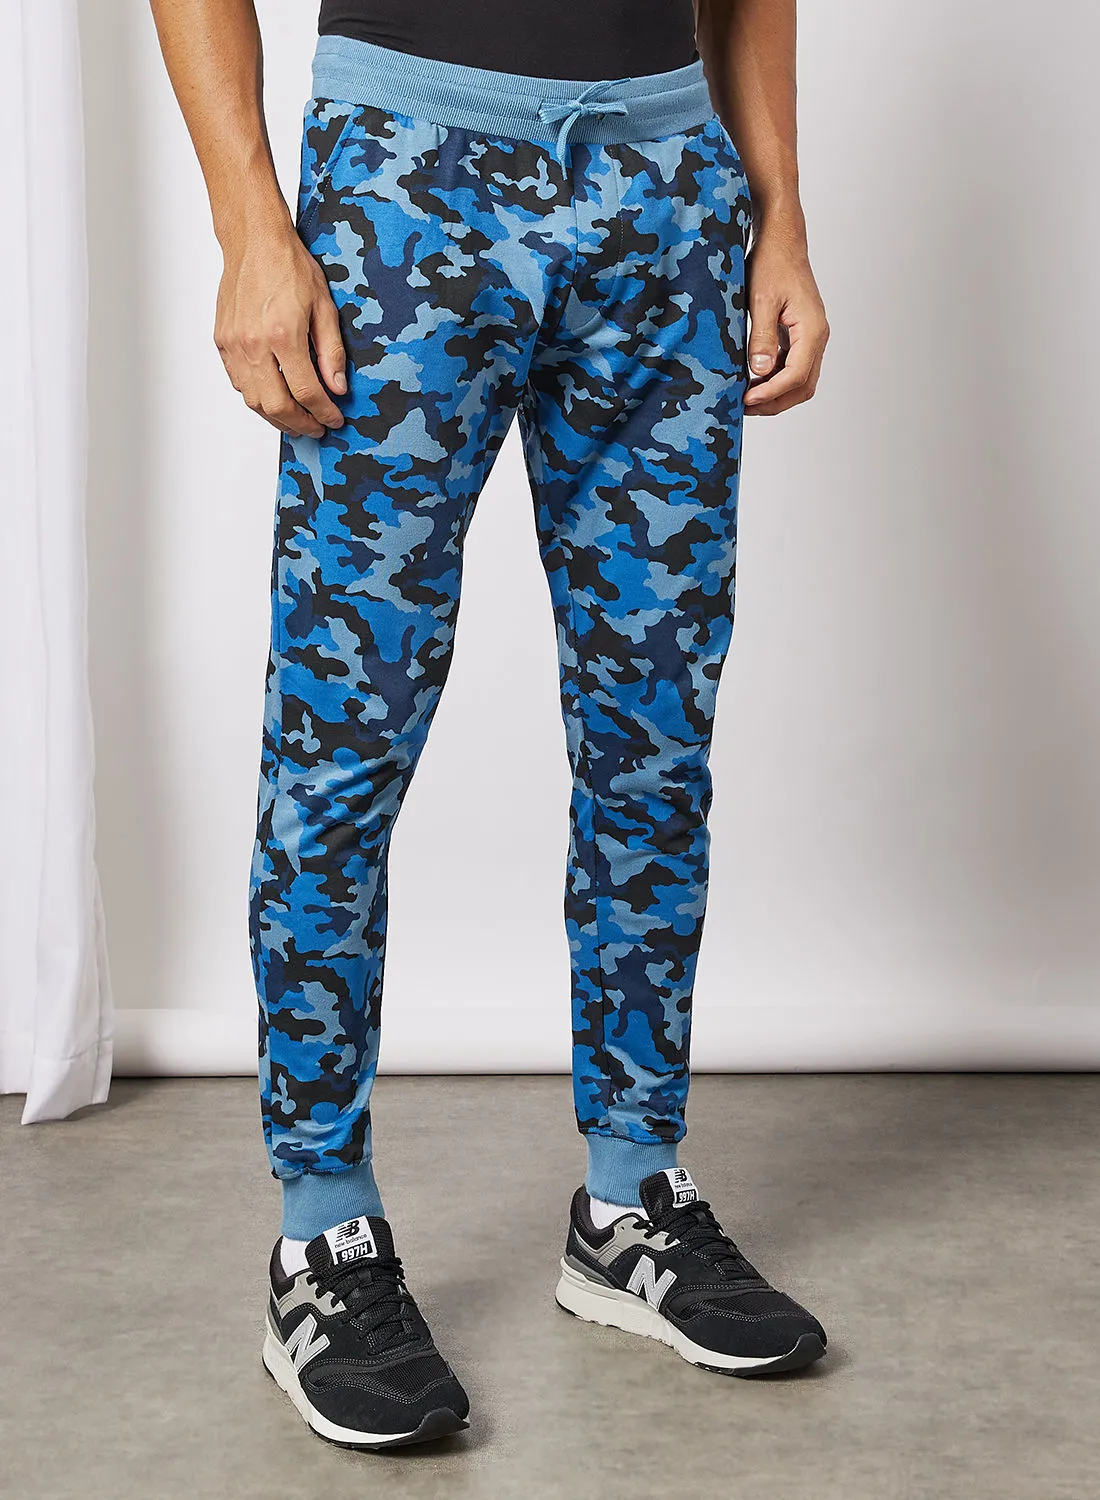 Noon East Men's Basic Casual Printed Joggers with Bottom Rib Deep Aegean